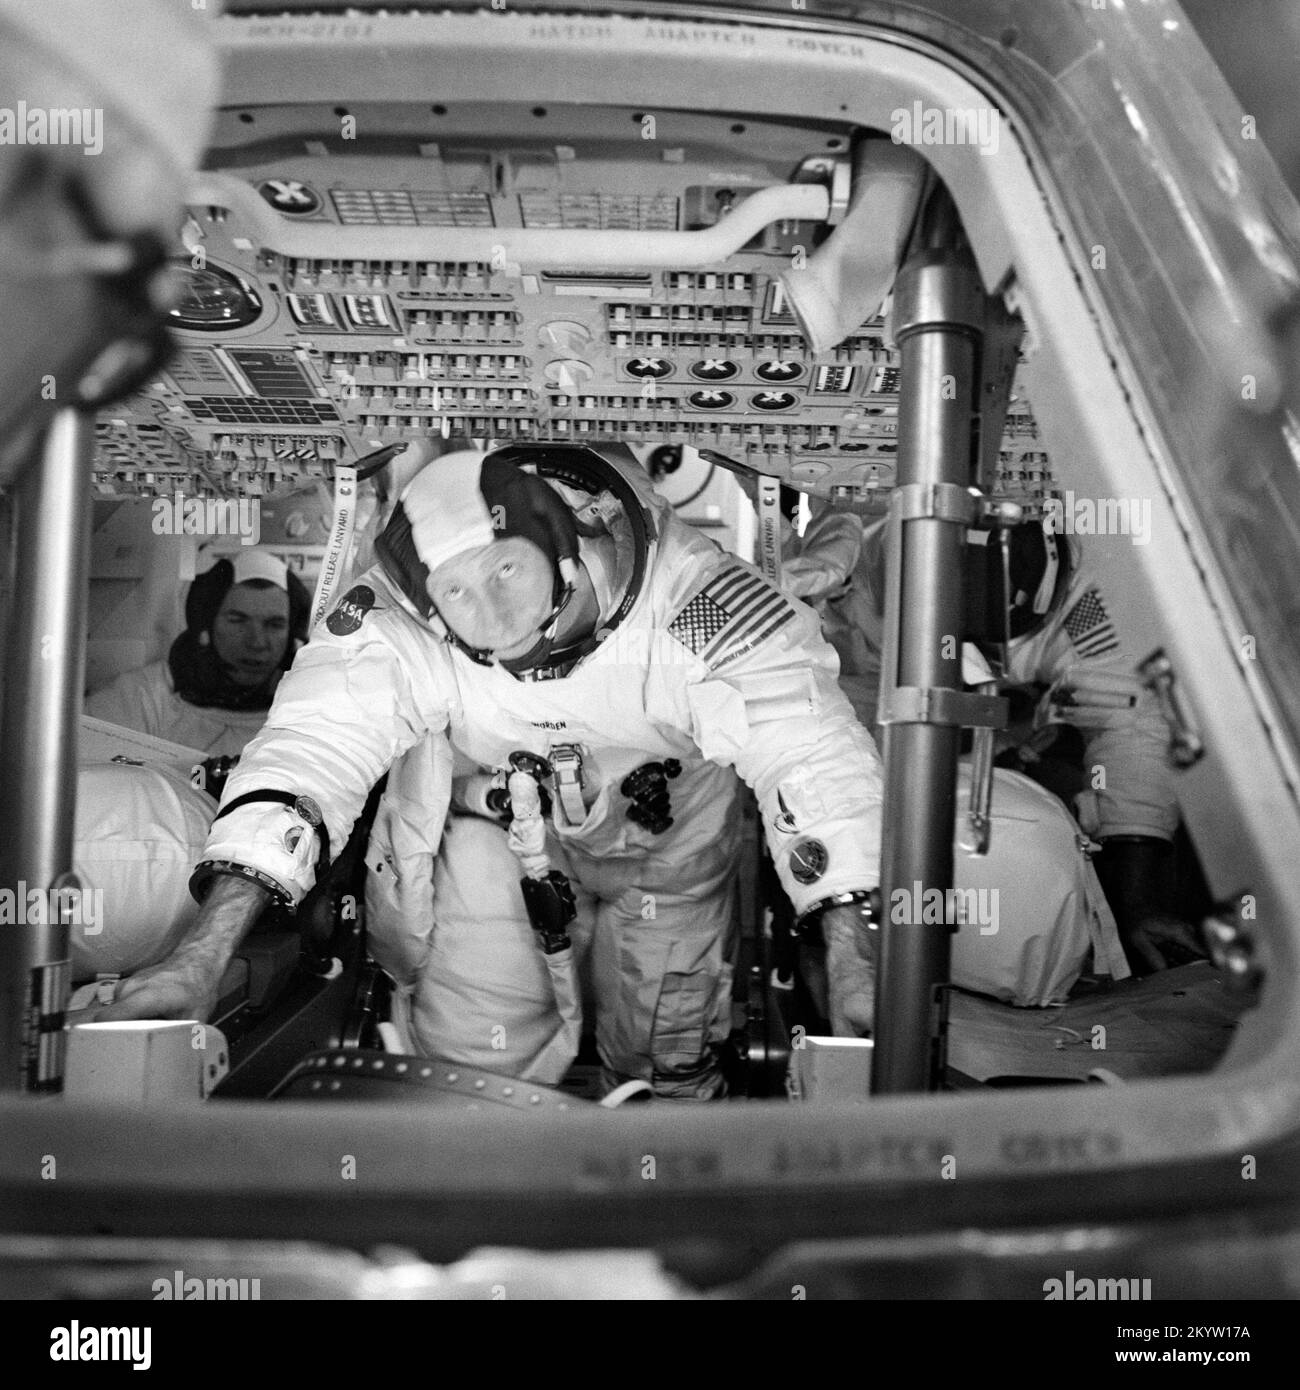 Astronaut Al Worden - in training The three Apollo 15 prime crew members can be seen inside the Apollo 15 Command Module (CM) during simulation training at the Kennedy Space Center (KSC). Astronaut David R. Scott, commander, is in the background to the left. Astronaut Alfred M. Worden, center foreground, is the command module pilot. Out of view, to the right background, is astronaut James B. Irwin, lunar module pilot.     Image Number: S71-29952  Date: March 26, 1971 Stock Photo